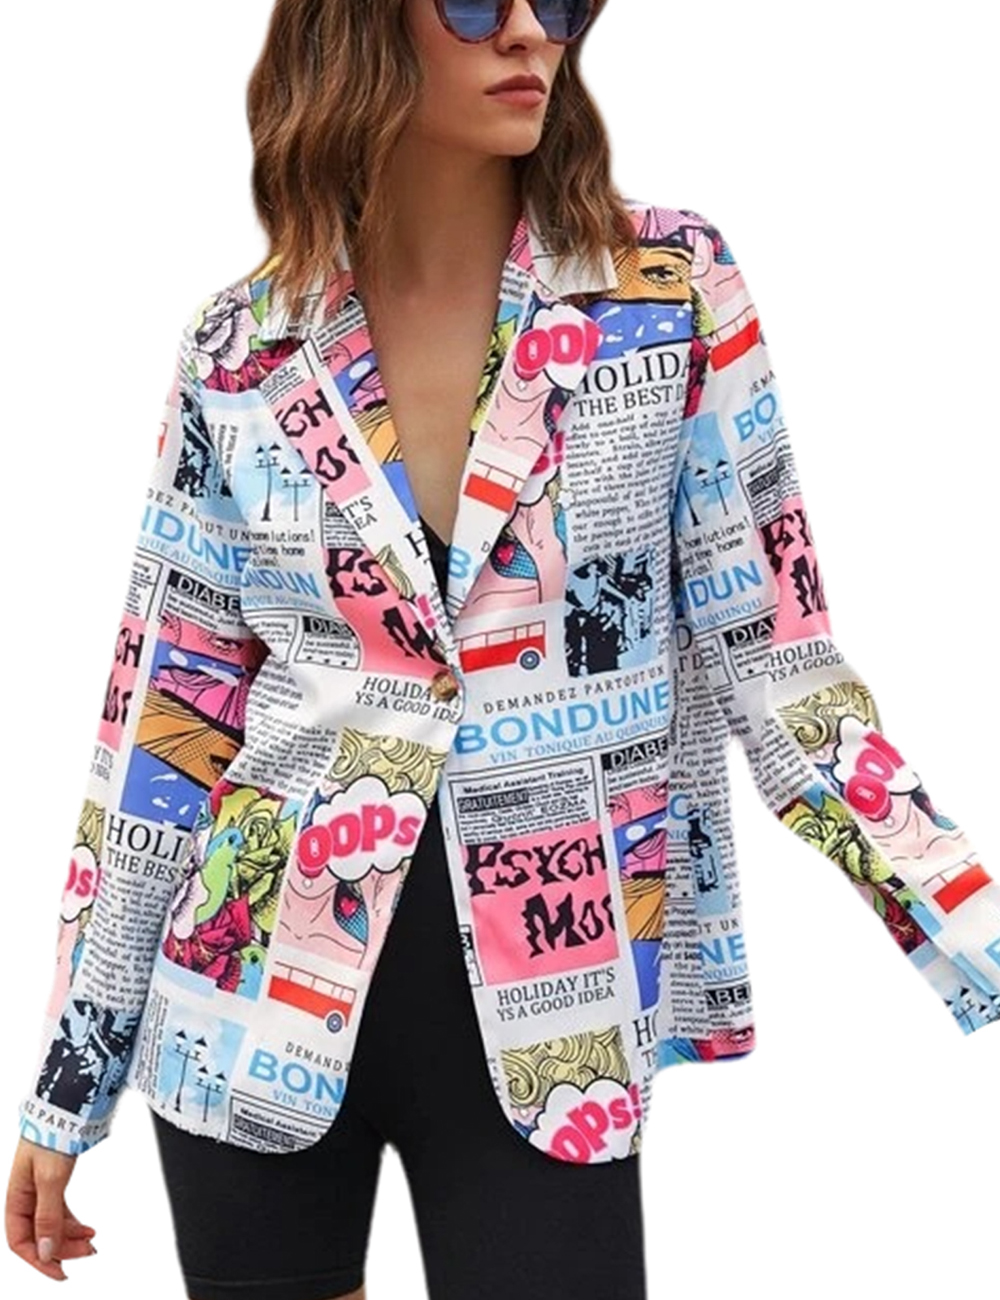 Newspaper Prints 1 70+ Hottest Spring Fashion Trends for Women - 72